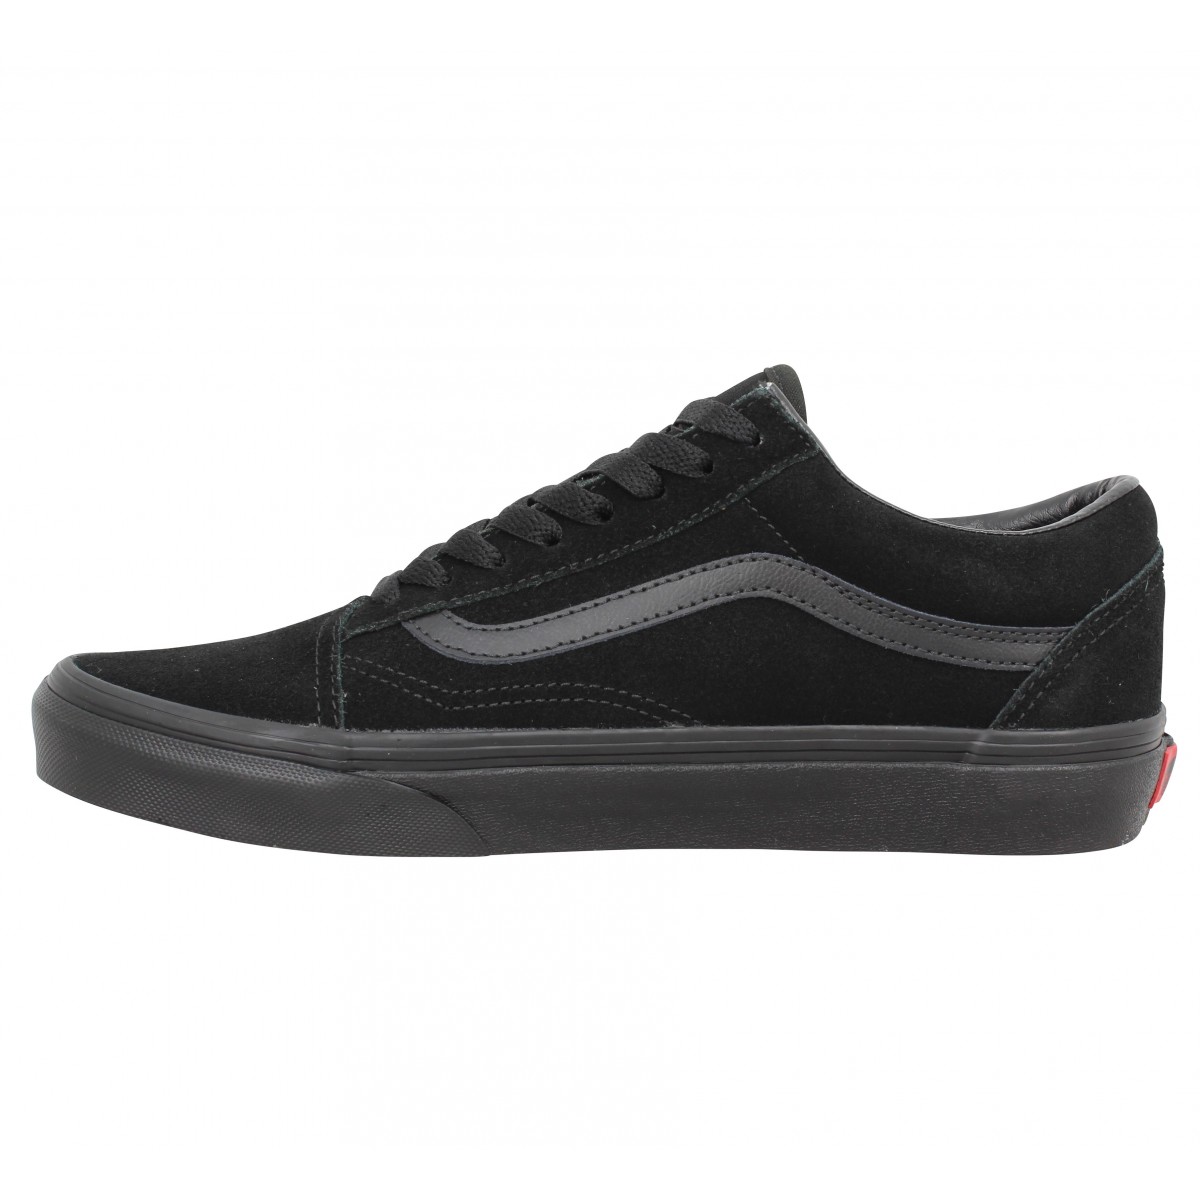 Chaussures Vans old skool velours homme noir homme | Fanny chaussures